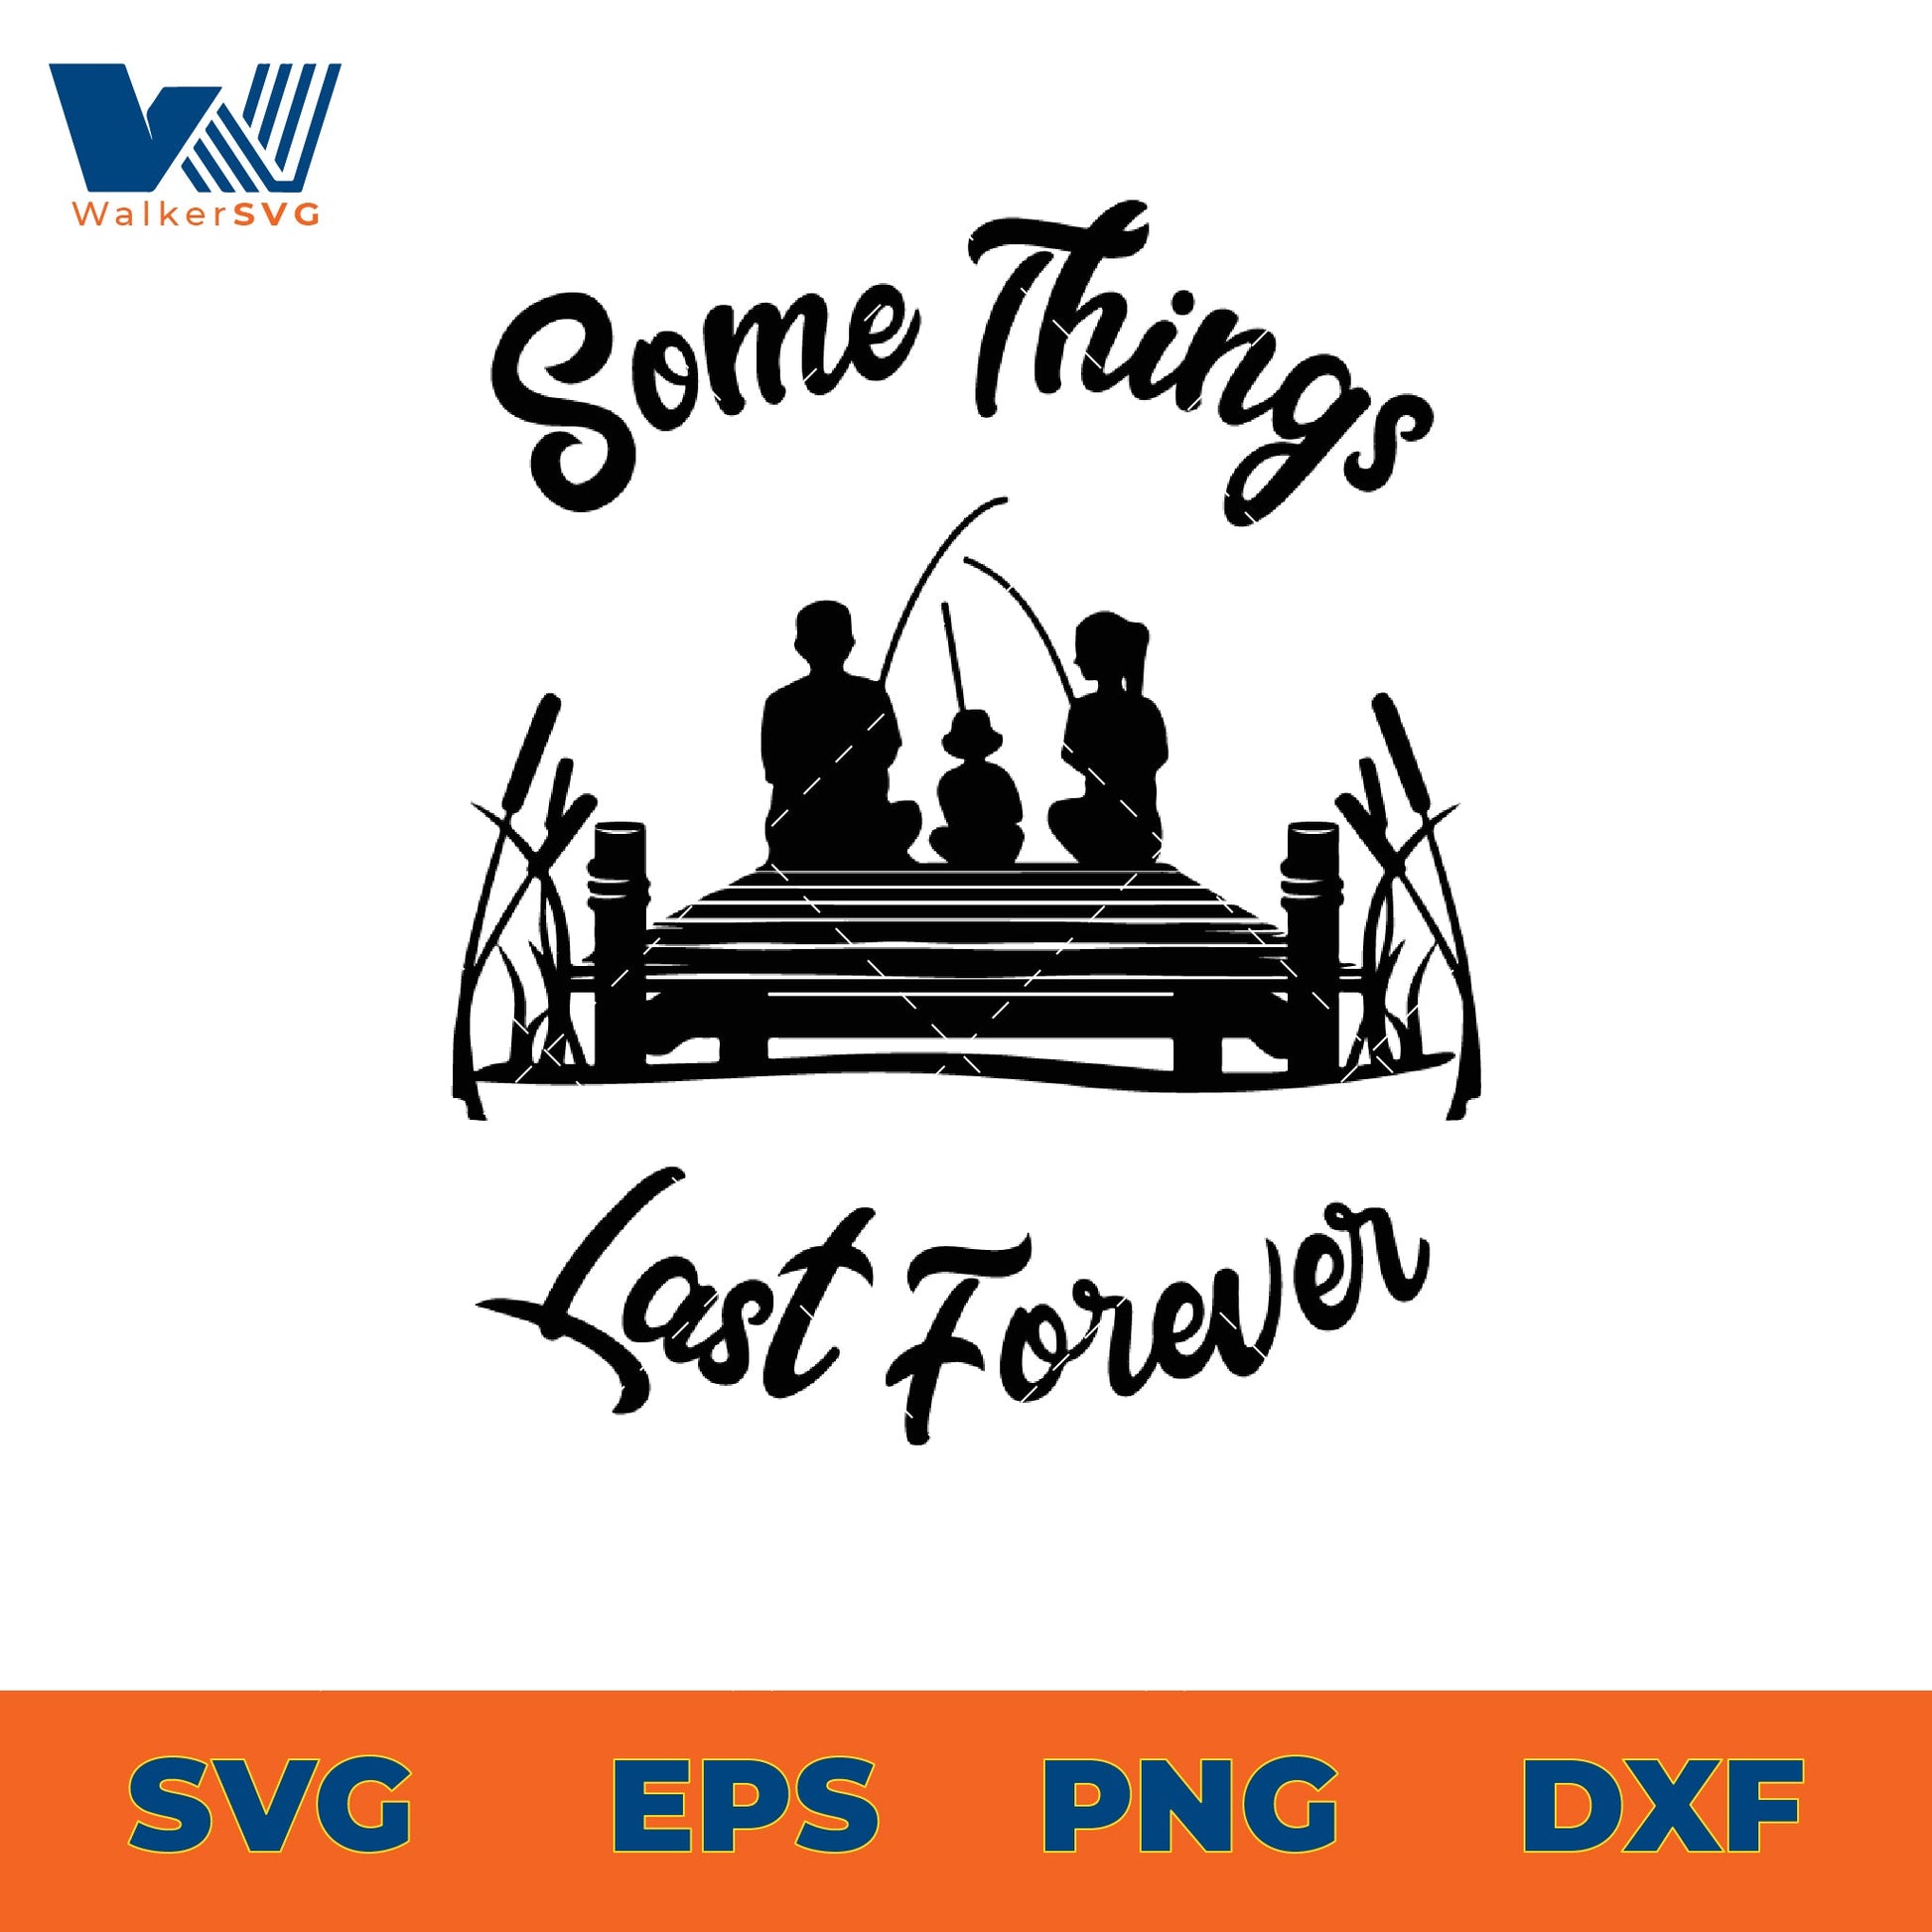 Some Things Last Forever SVG